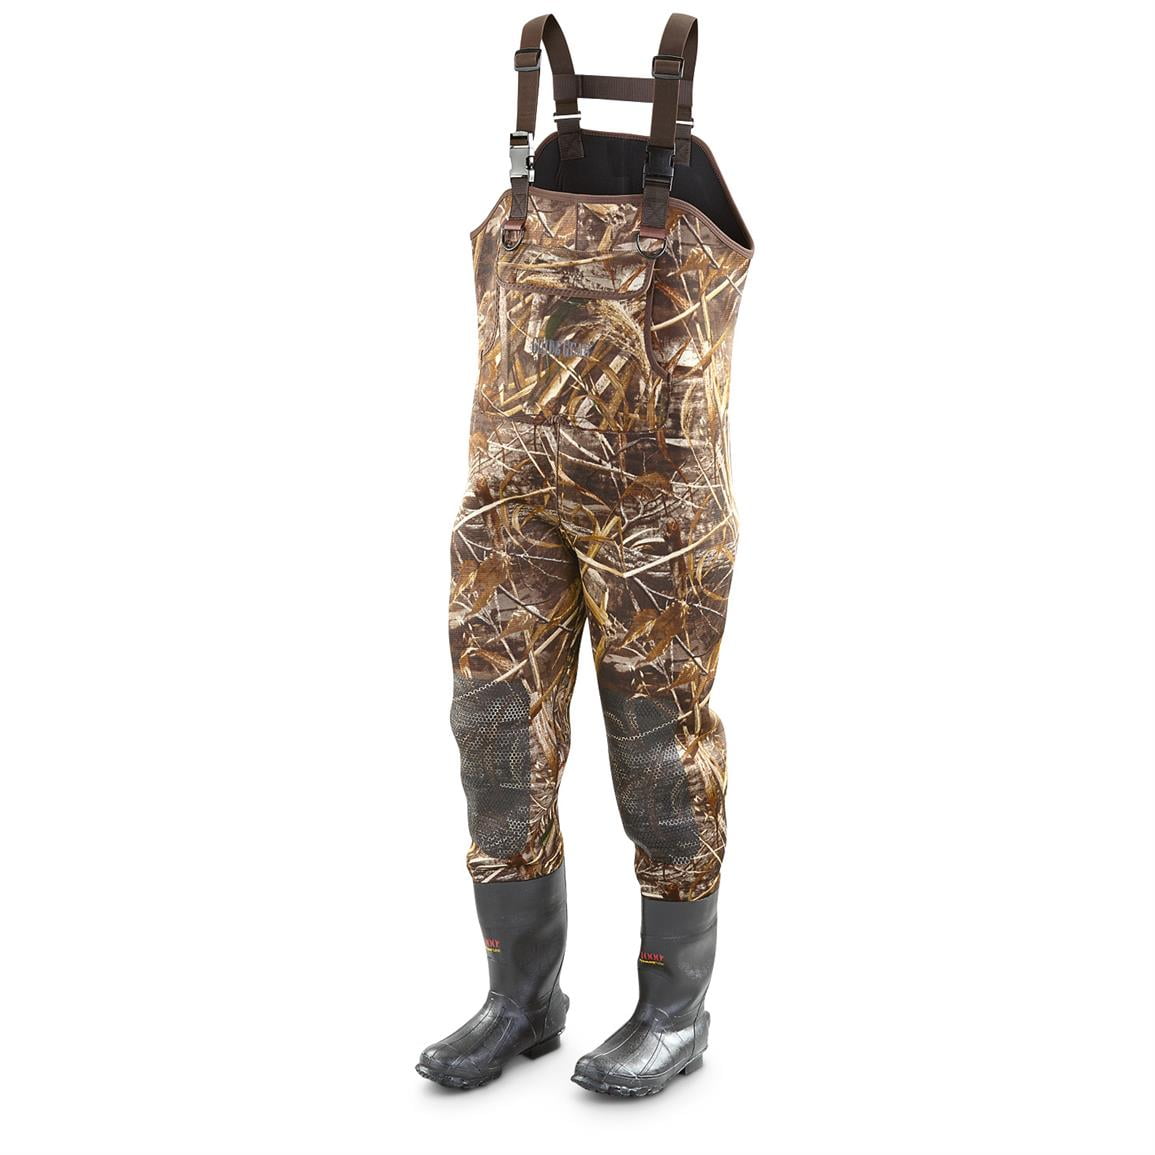 HISEA Chest Waders Neoprene Duck Hunting Waders For Men With 600G